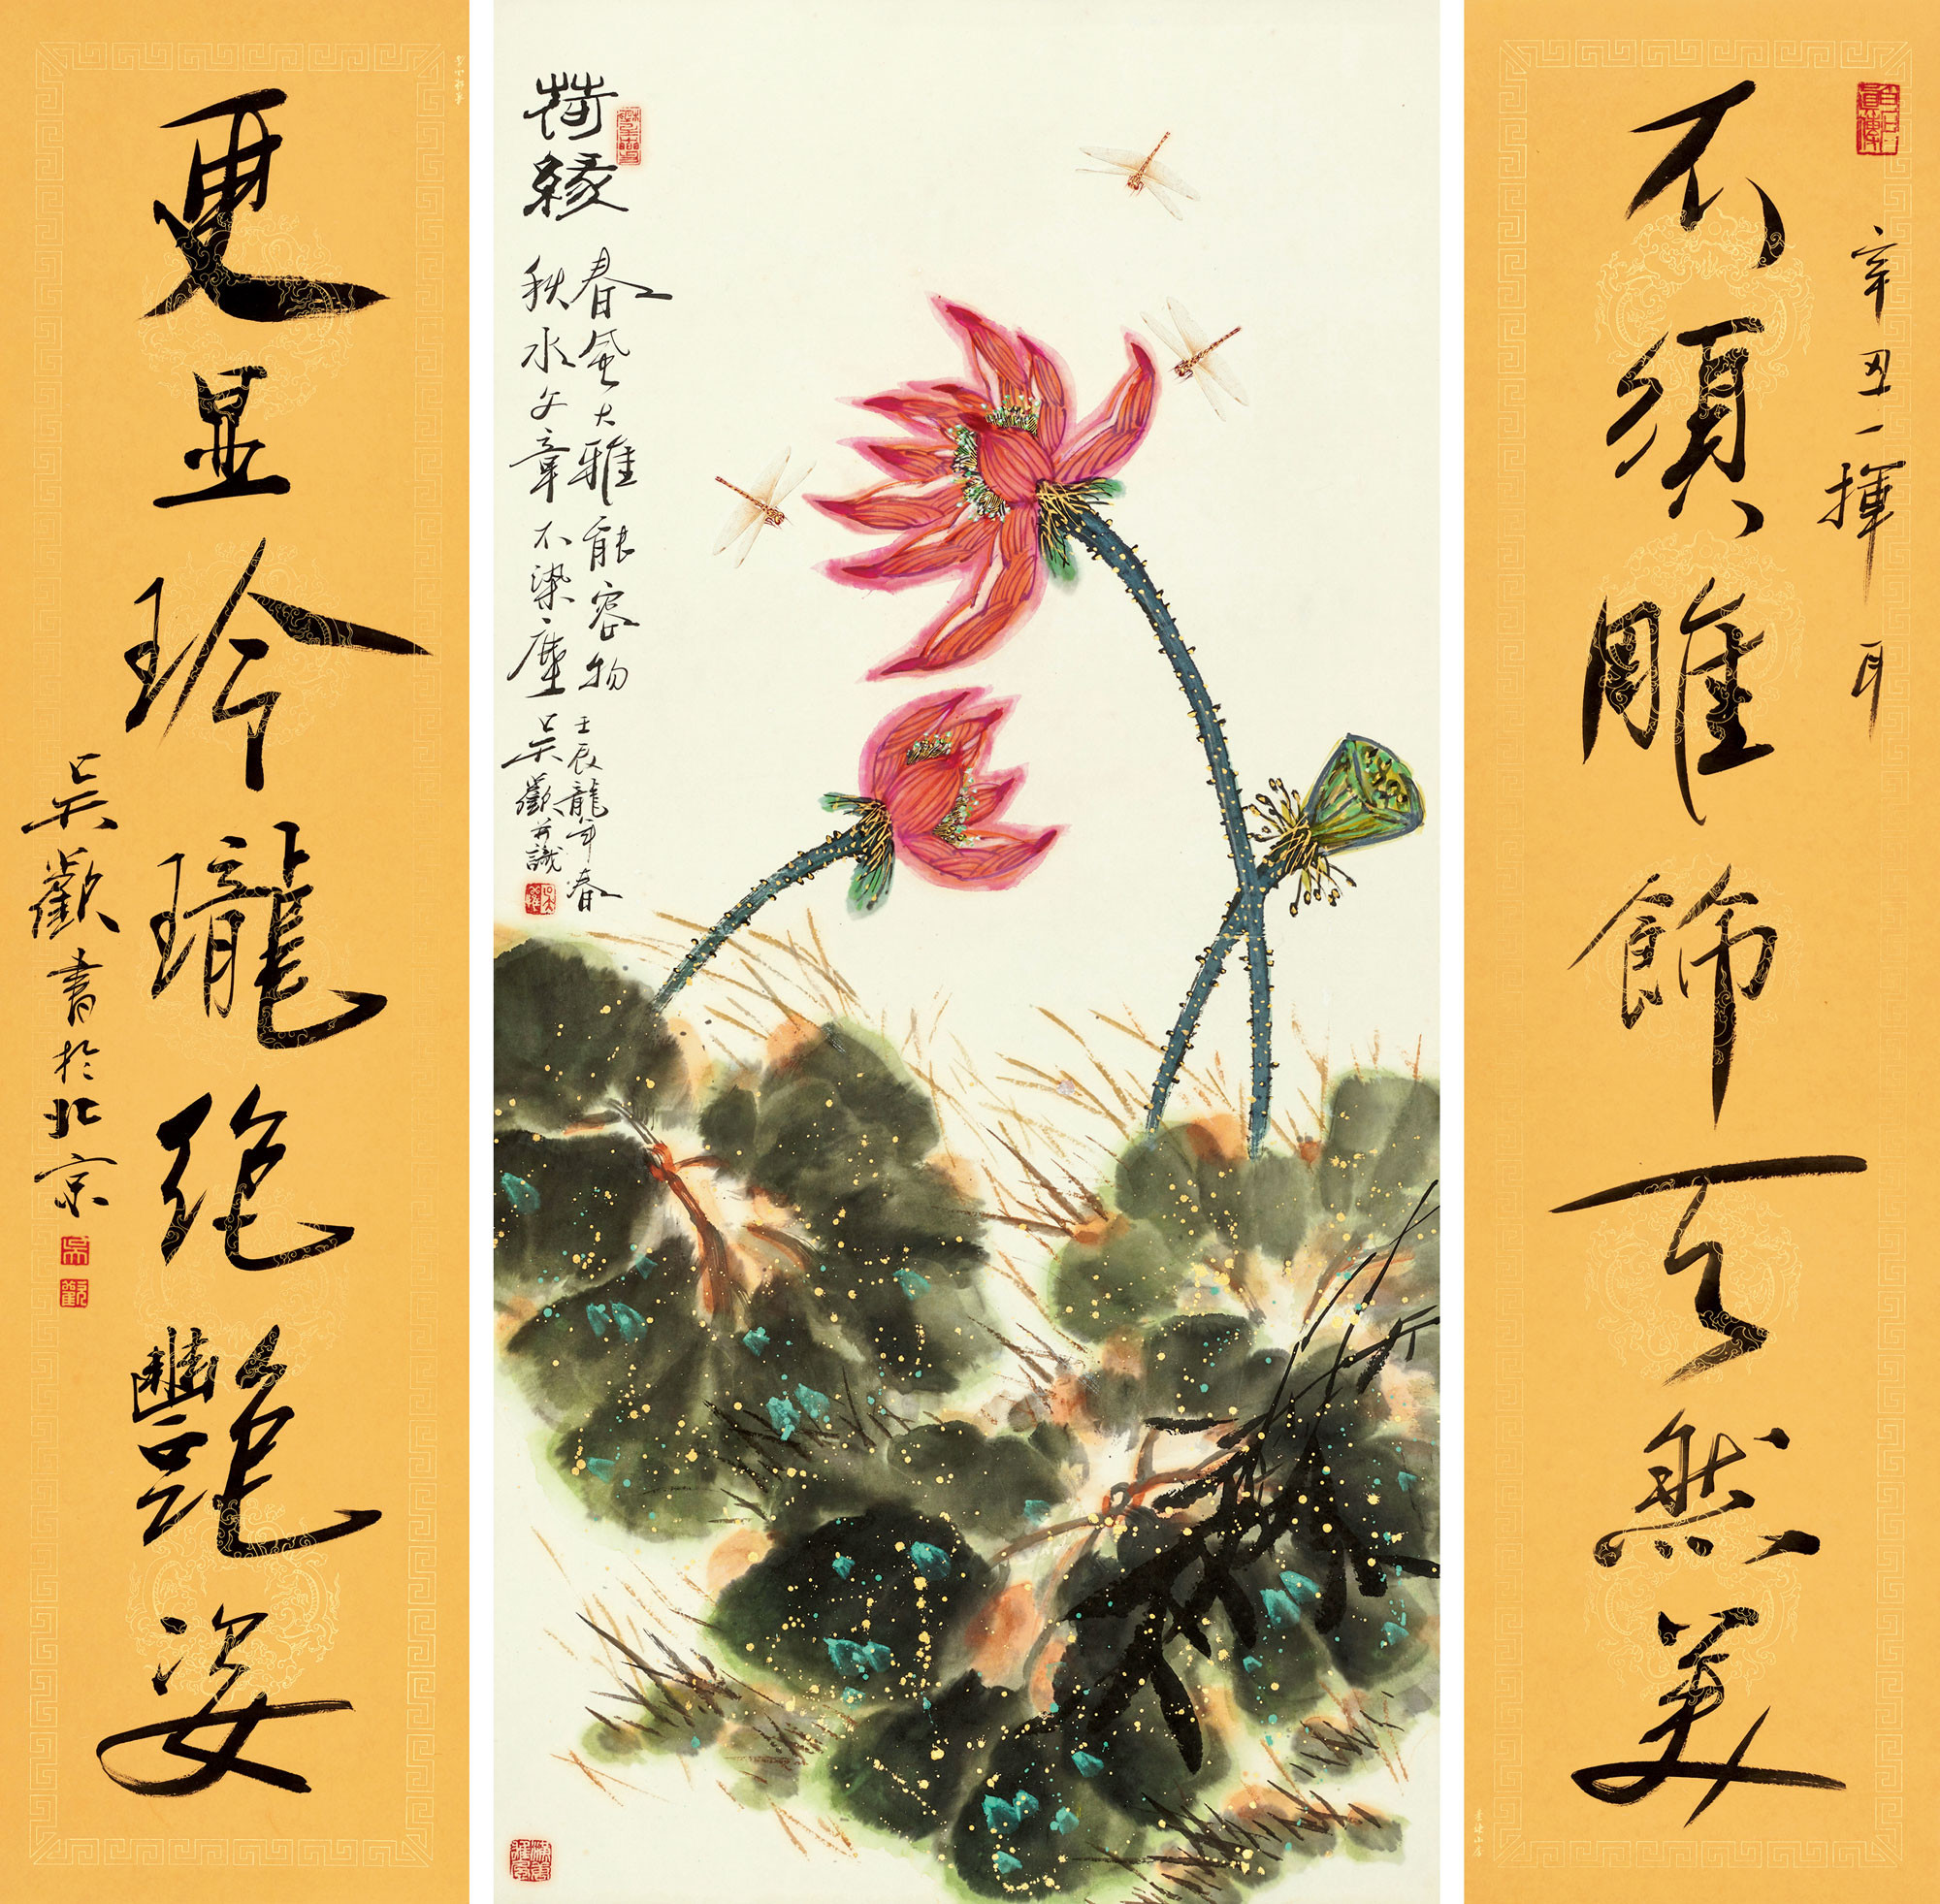 Seven- Characters Calligraphic Couplet in Running Script and Lotus